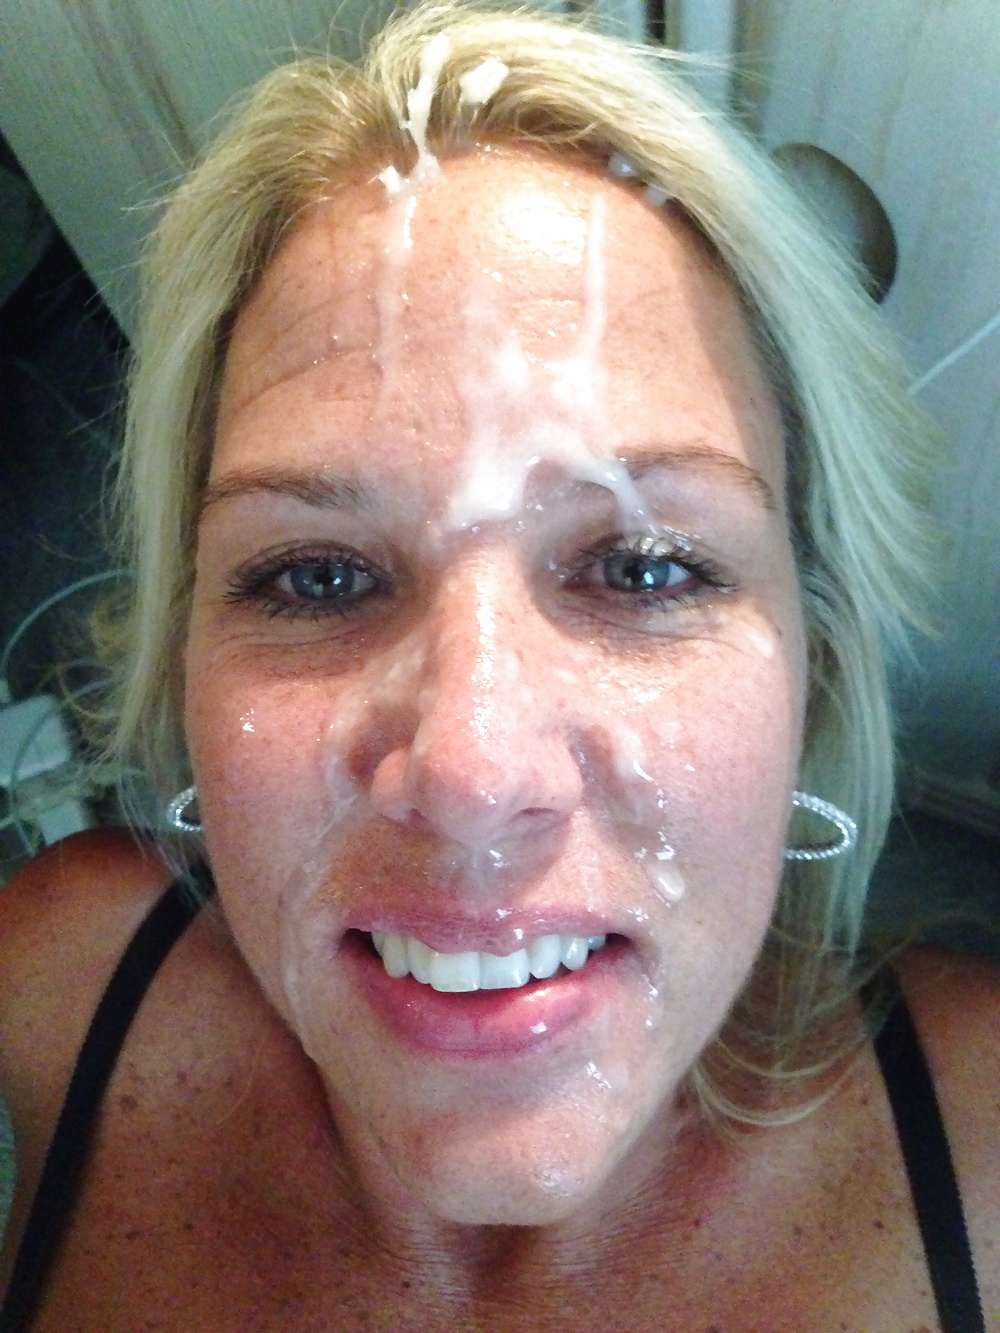 Second cum facial of the day #29885888